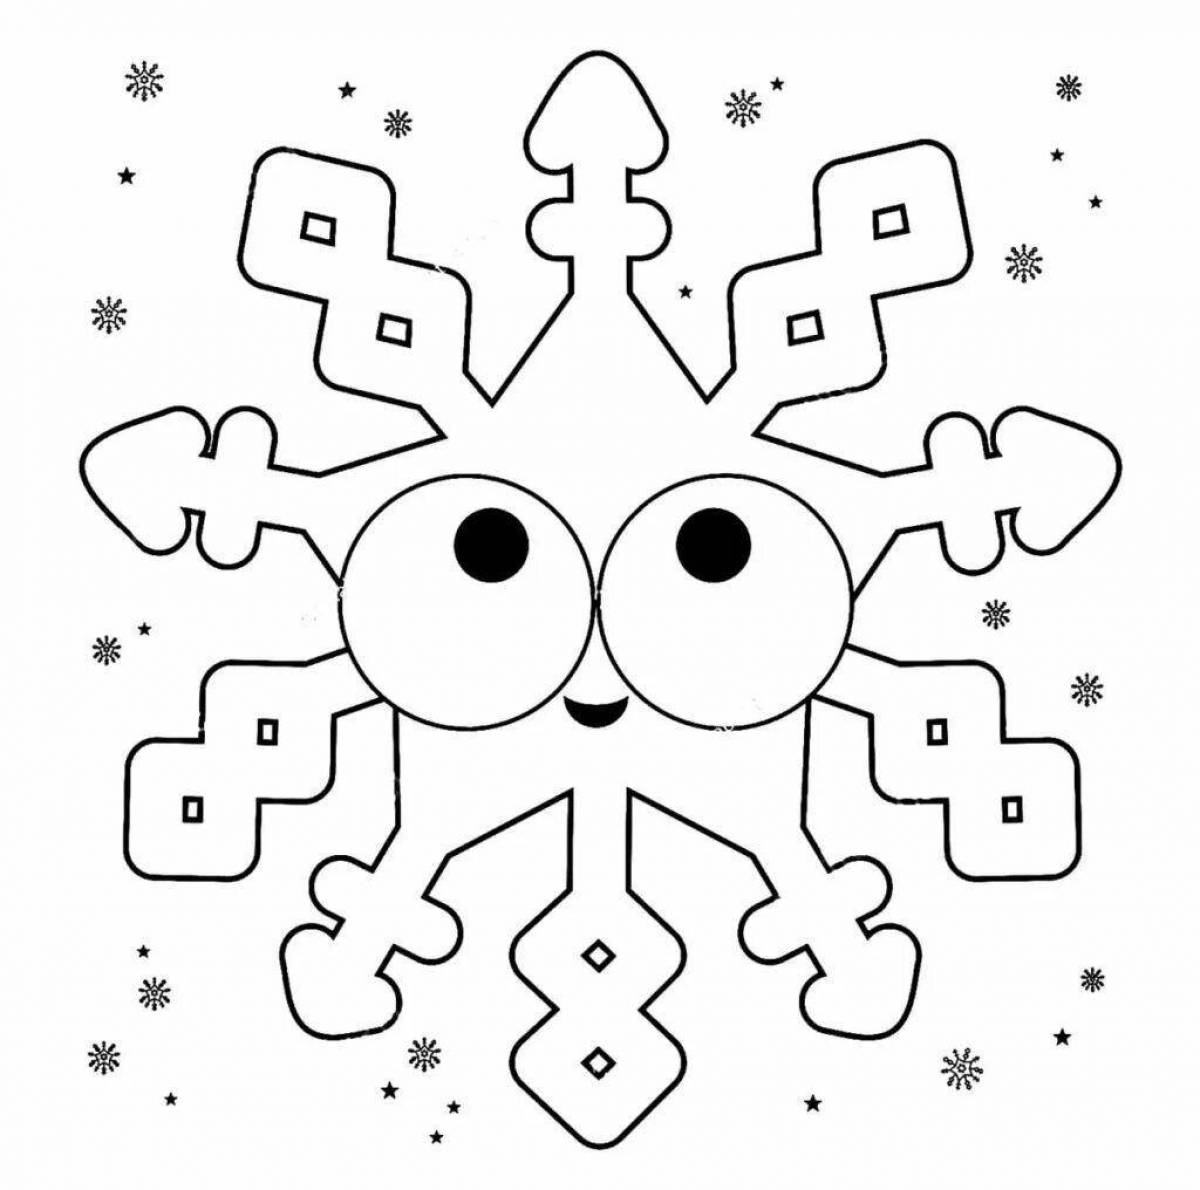 Sparkling coloring pages snowflakes for children 4-5 years old in kindergarten